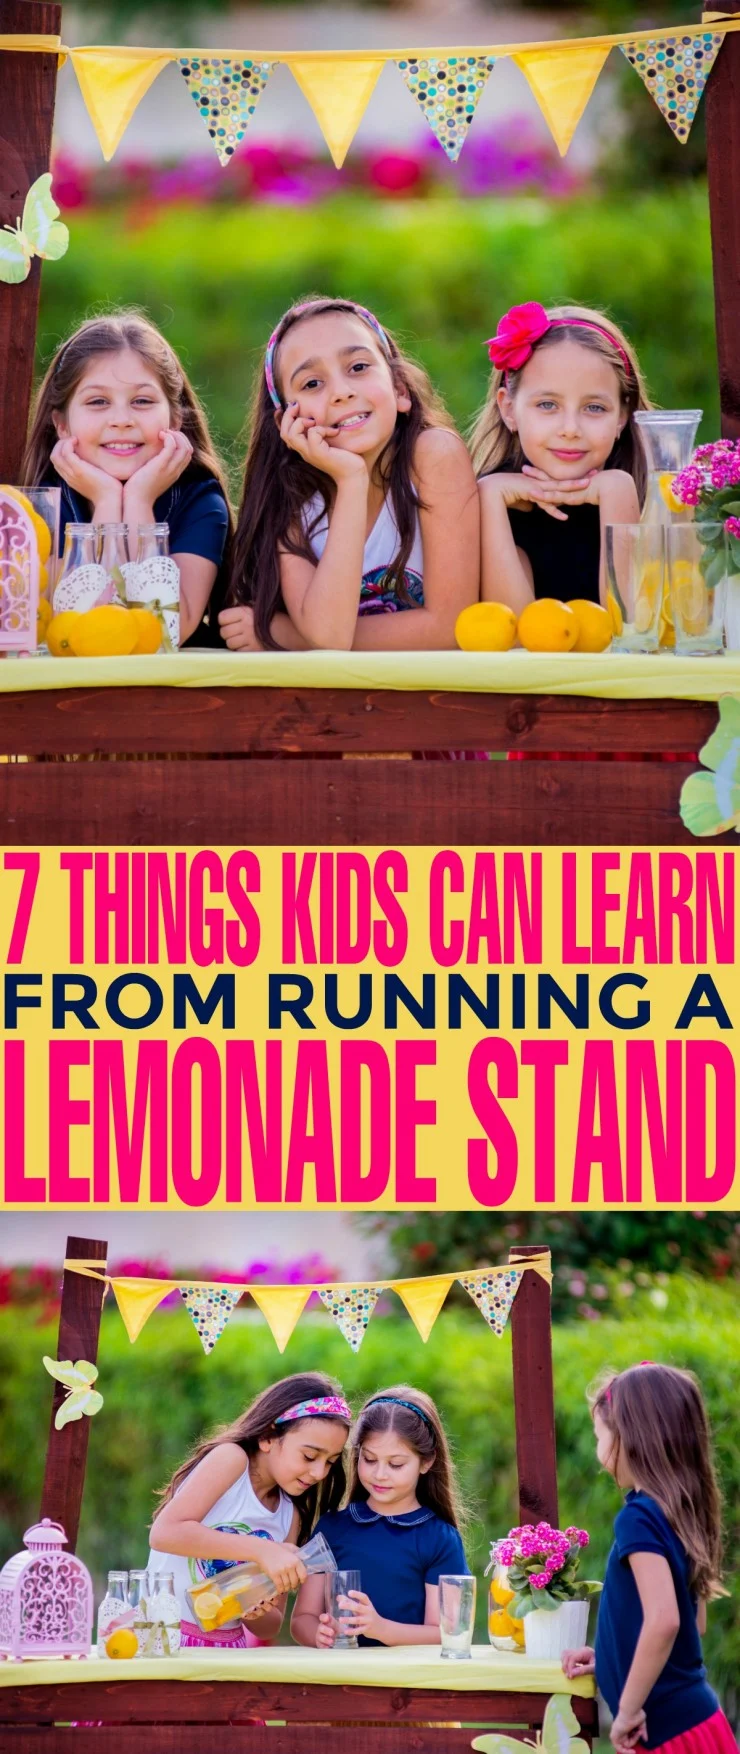 7 Things Kids Can Learn From Running a Lemonade Stand: Lemonade stands are a quintessential summer experience - an experience for kids that is not only fun but can teach them valuable life skills and give them their first taste at entrepreneurship. 